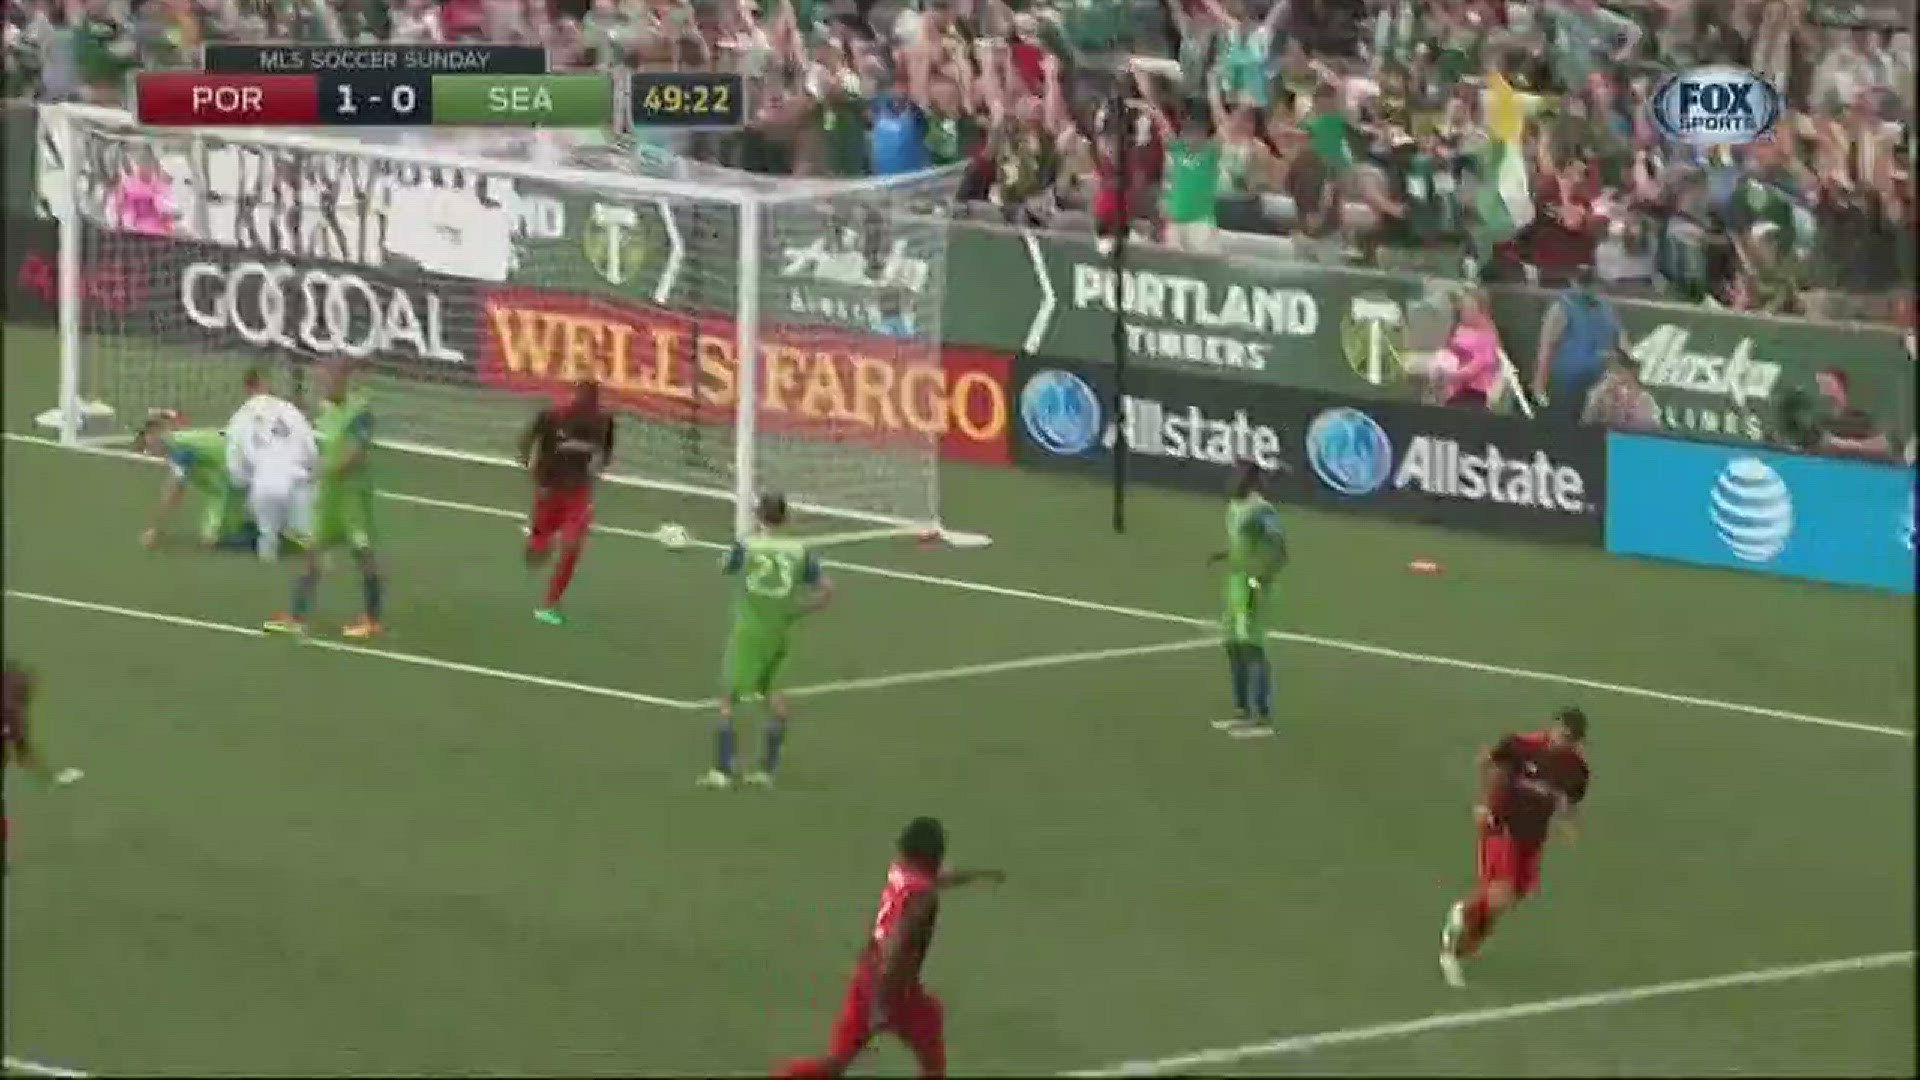 Timbers move Sunday's game time due to heat